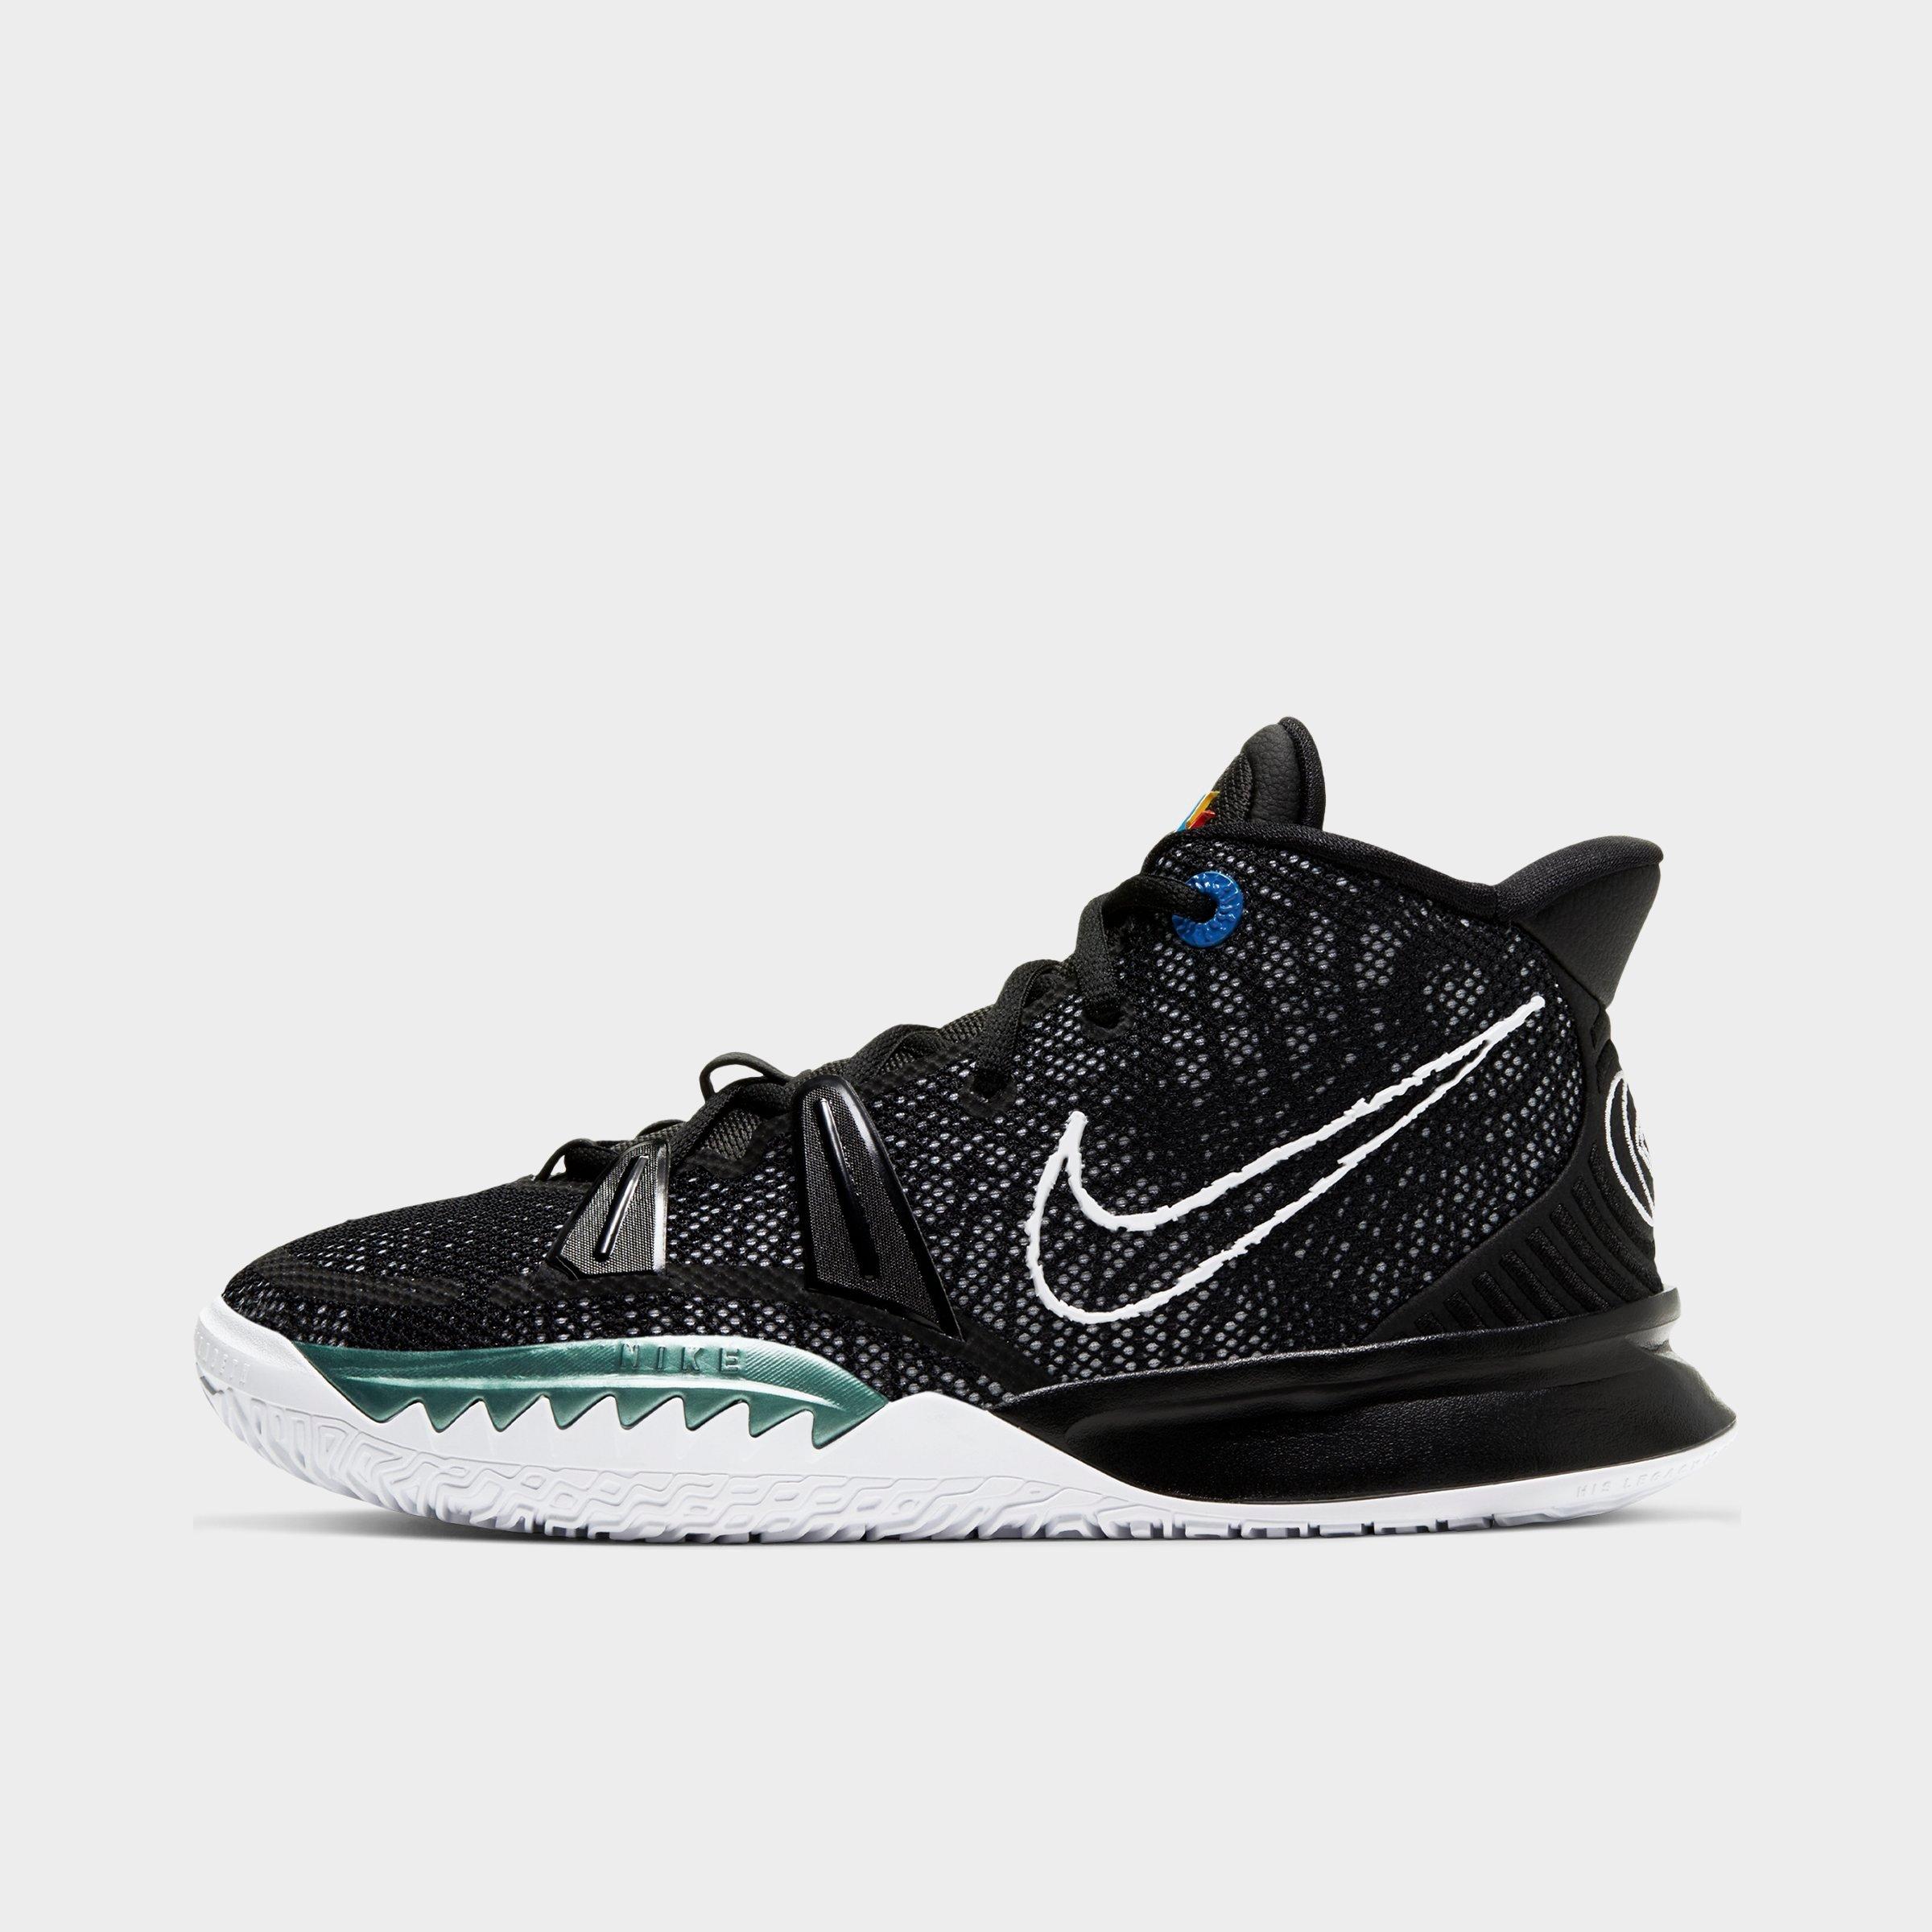 kyrie finish line